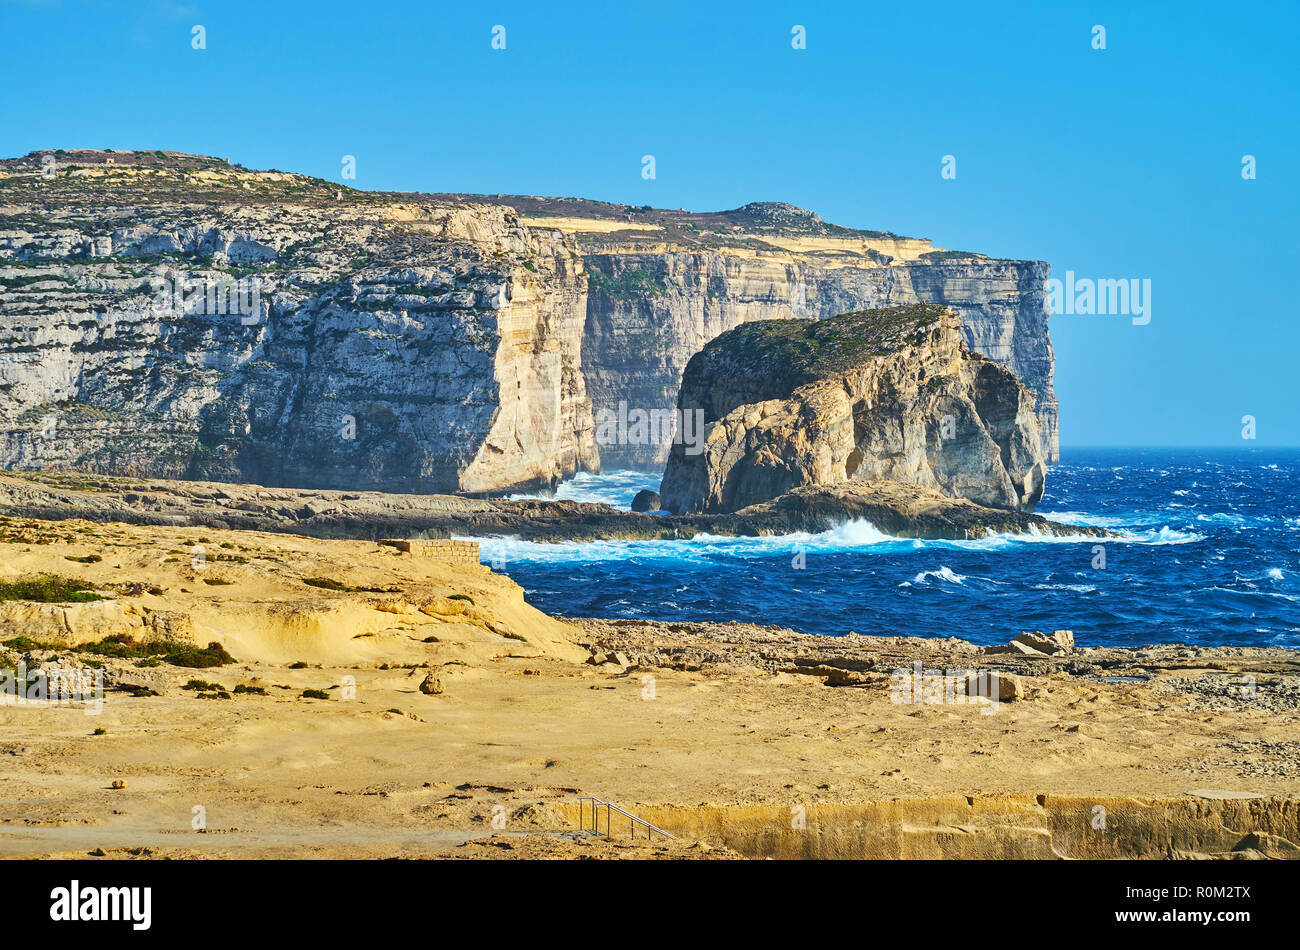 The tall cliffs and beautiful Fungus Rock (General's Rock) on the coast of Dwejra Bay, famous for Azure Window site and Dwejra Inland Sea, San Lawrenz Stock Photo